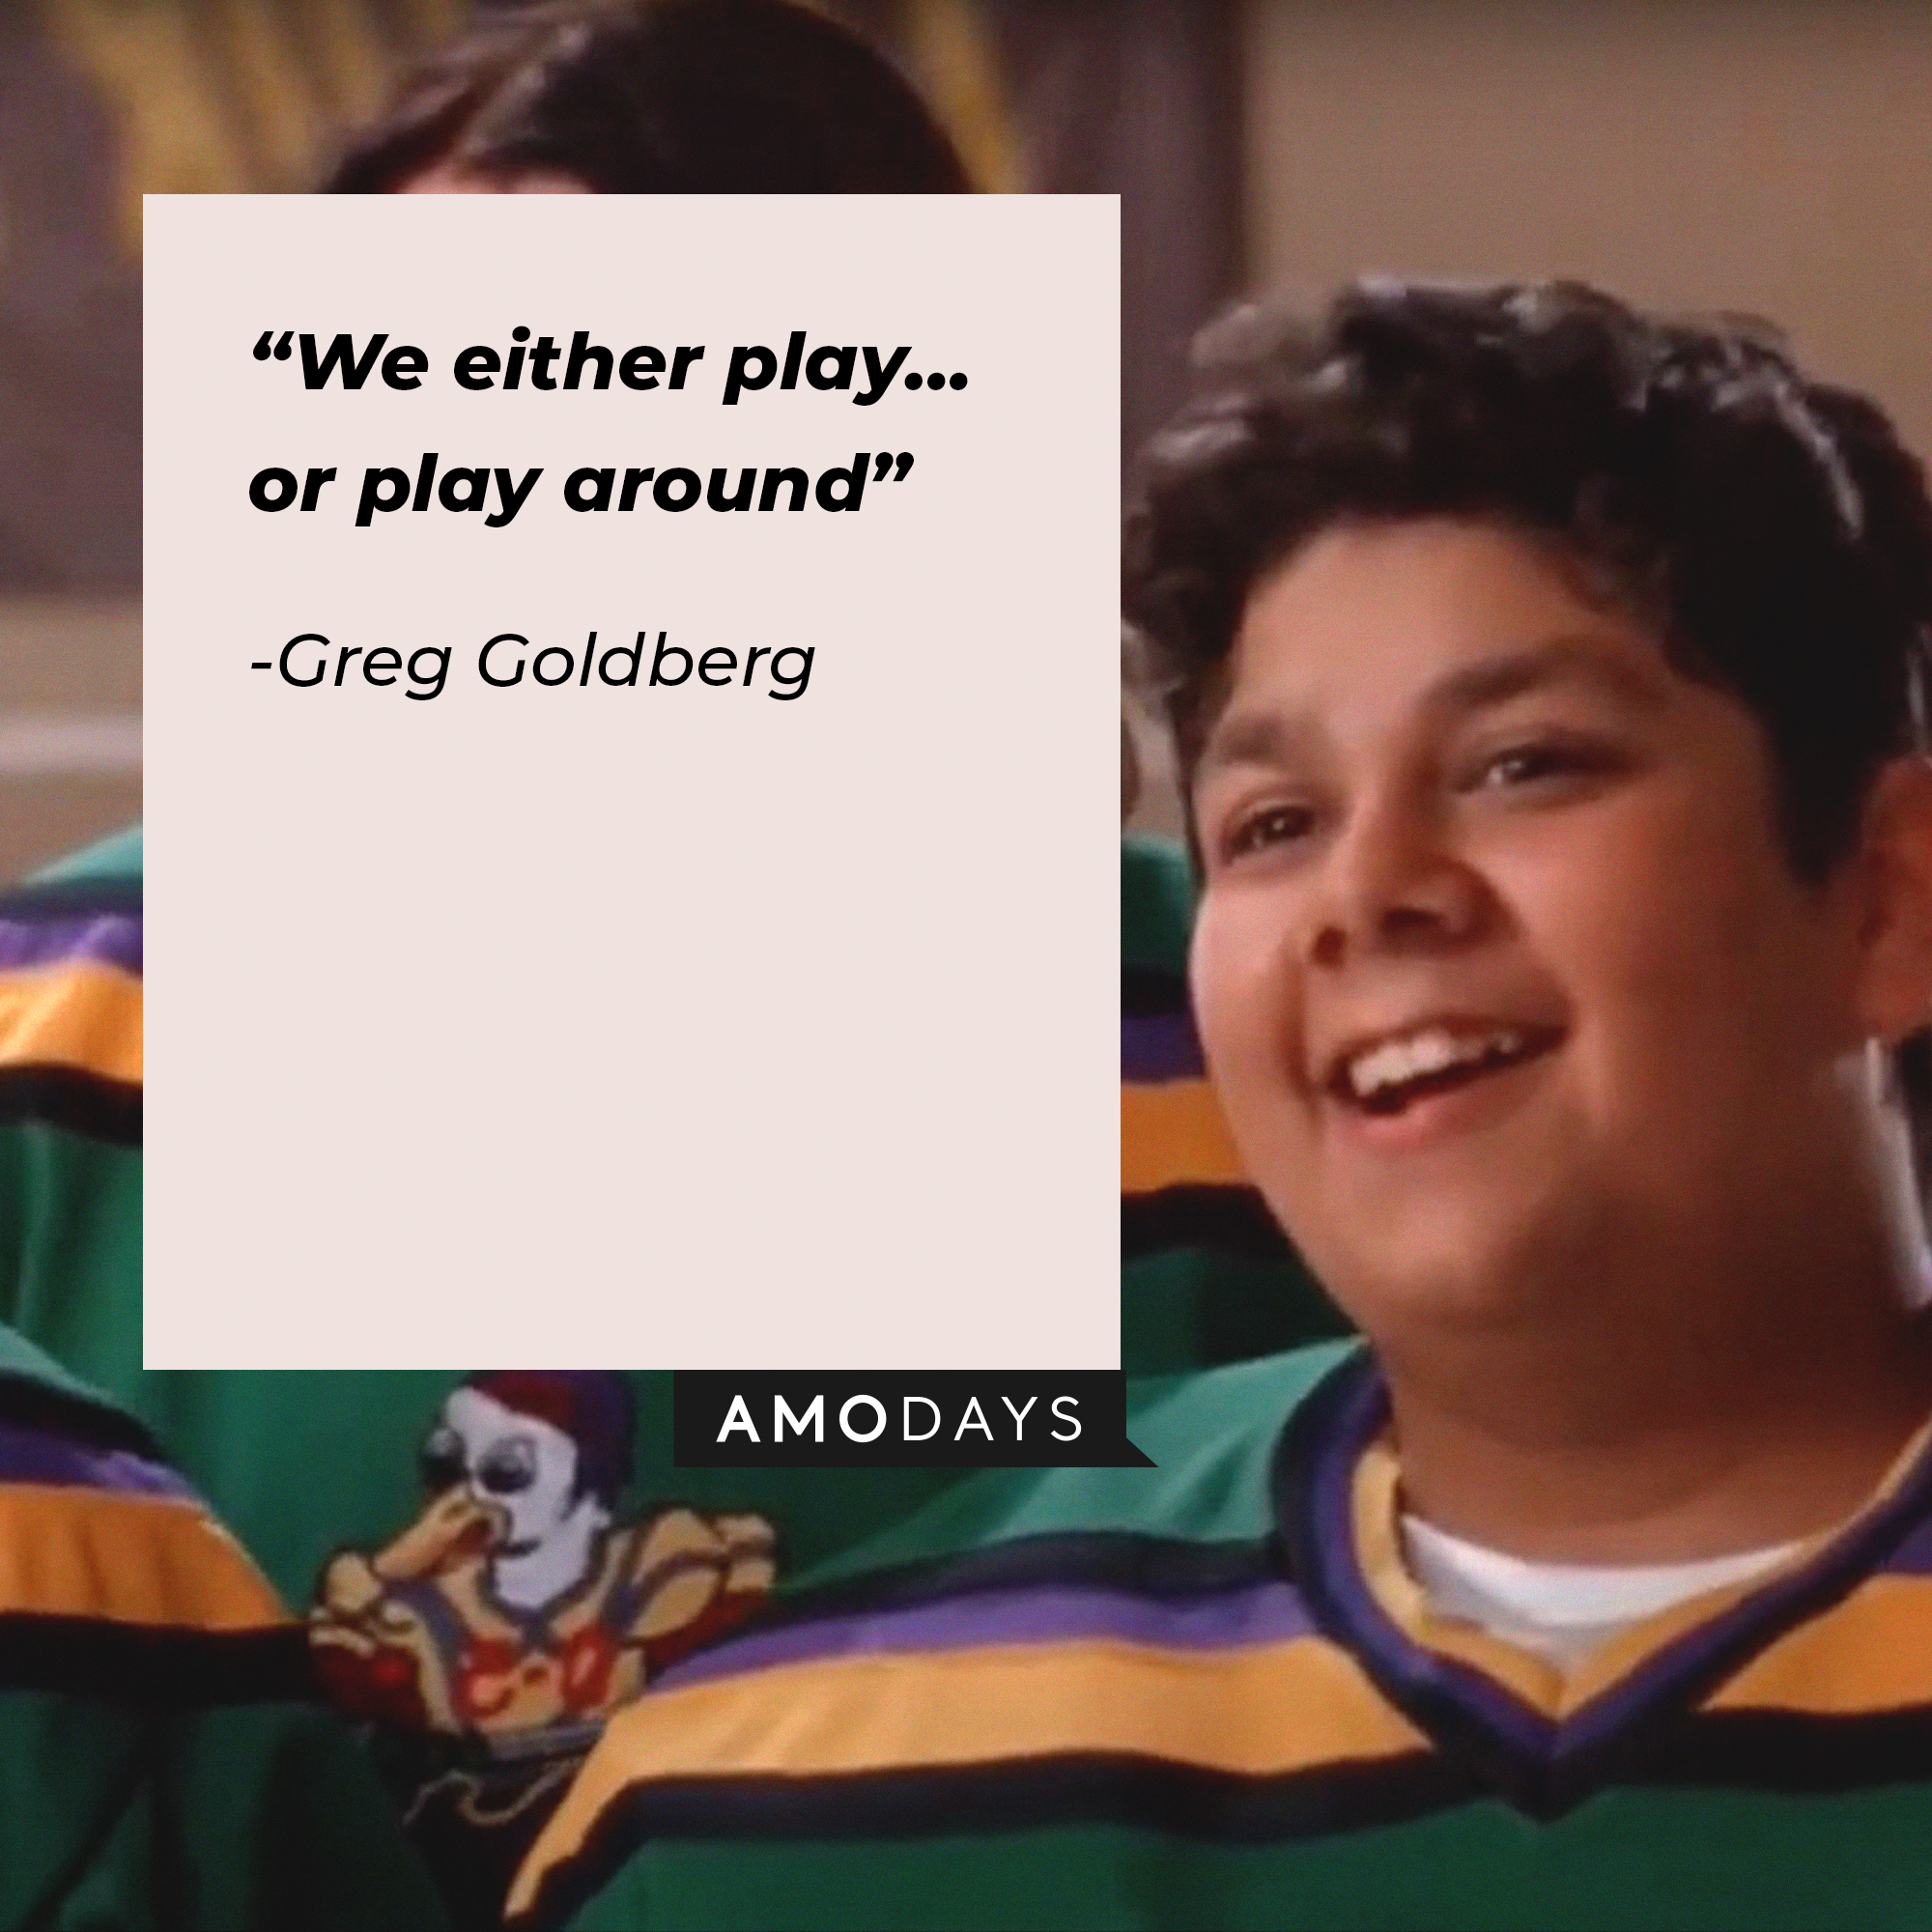 A picture of Greg Goldberg with his quote: “We either play…or play around.” | Source: youtube.com/disneyplus